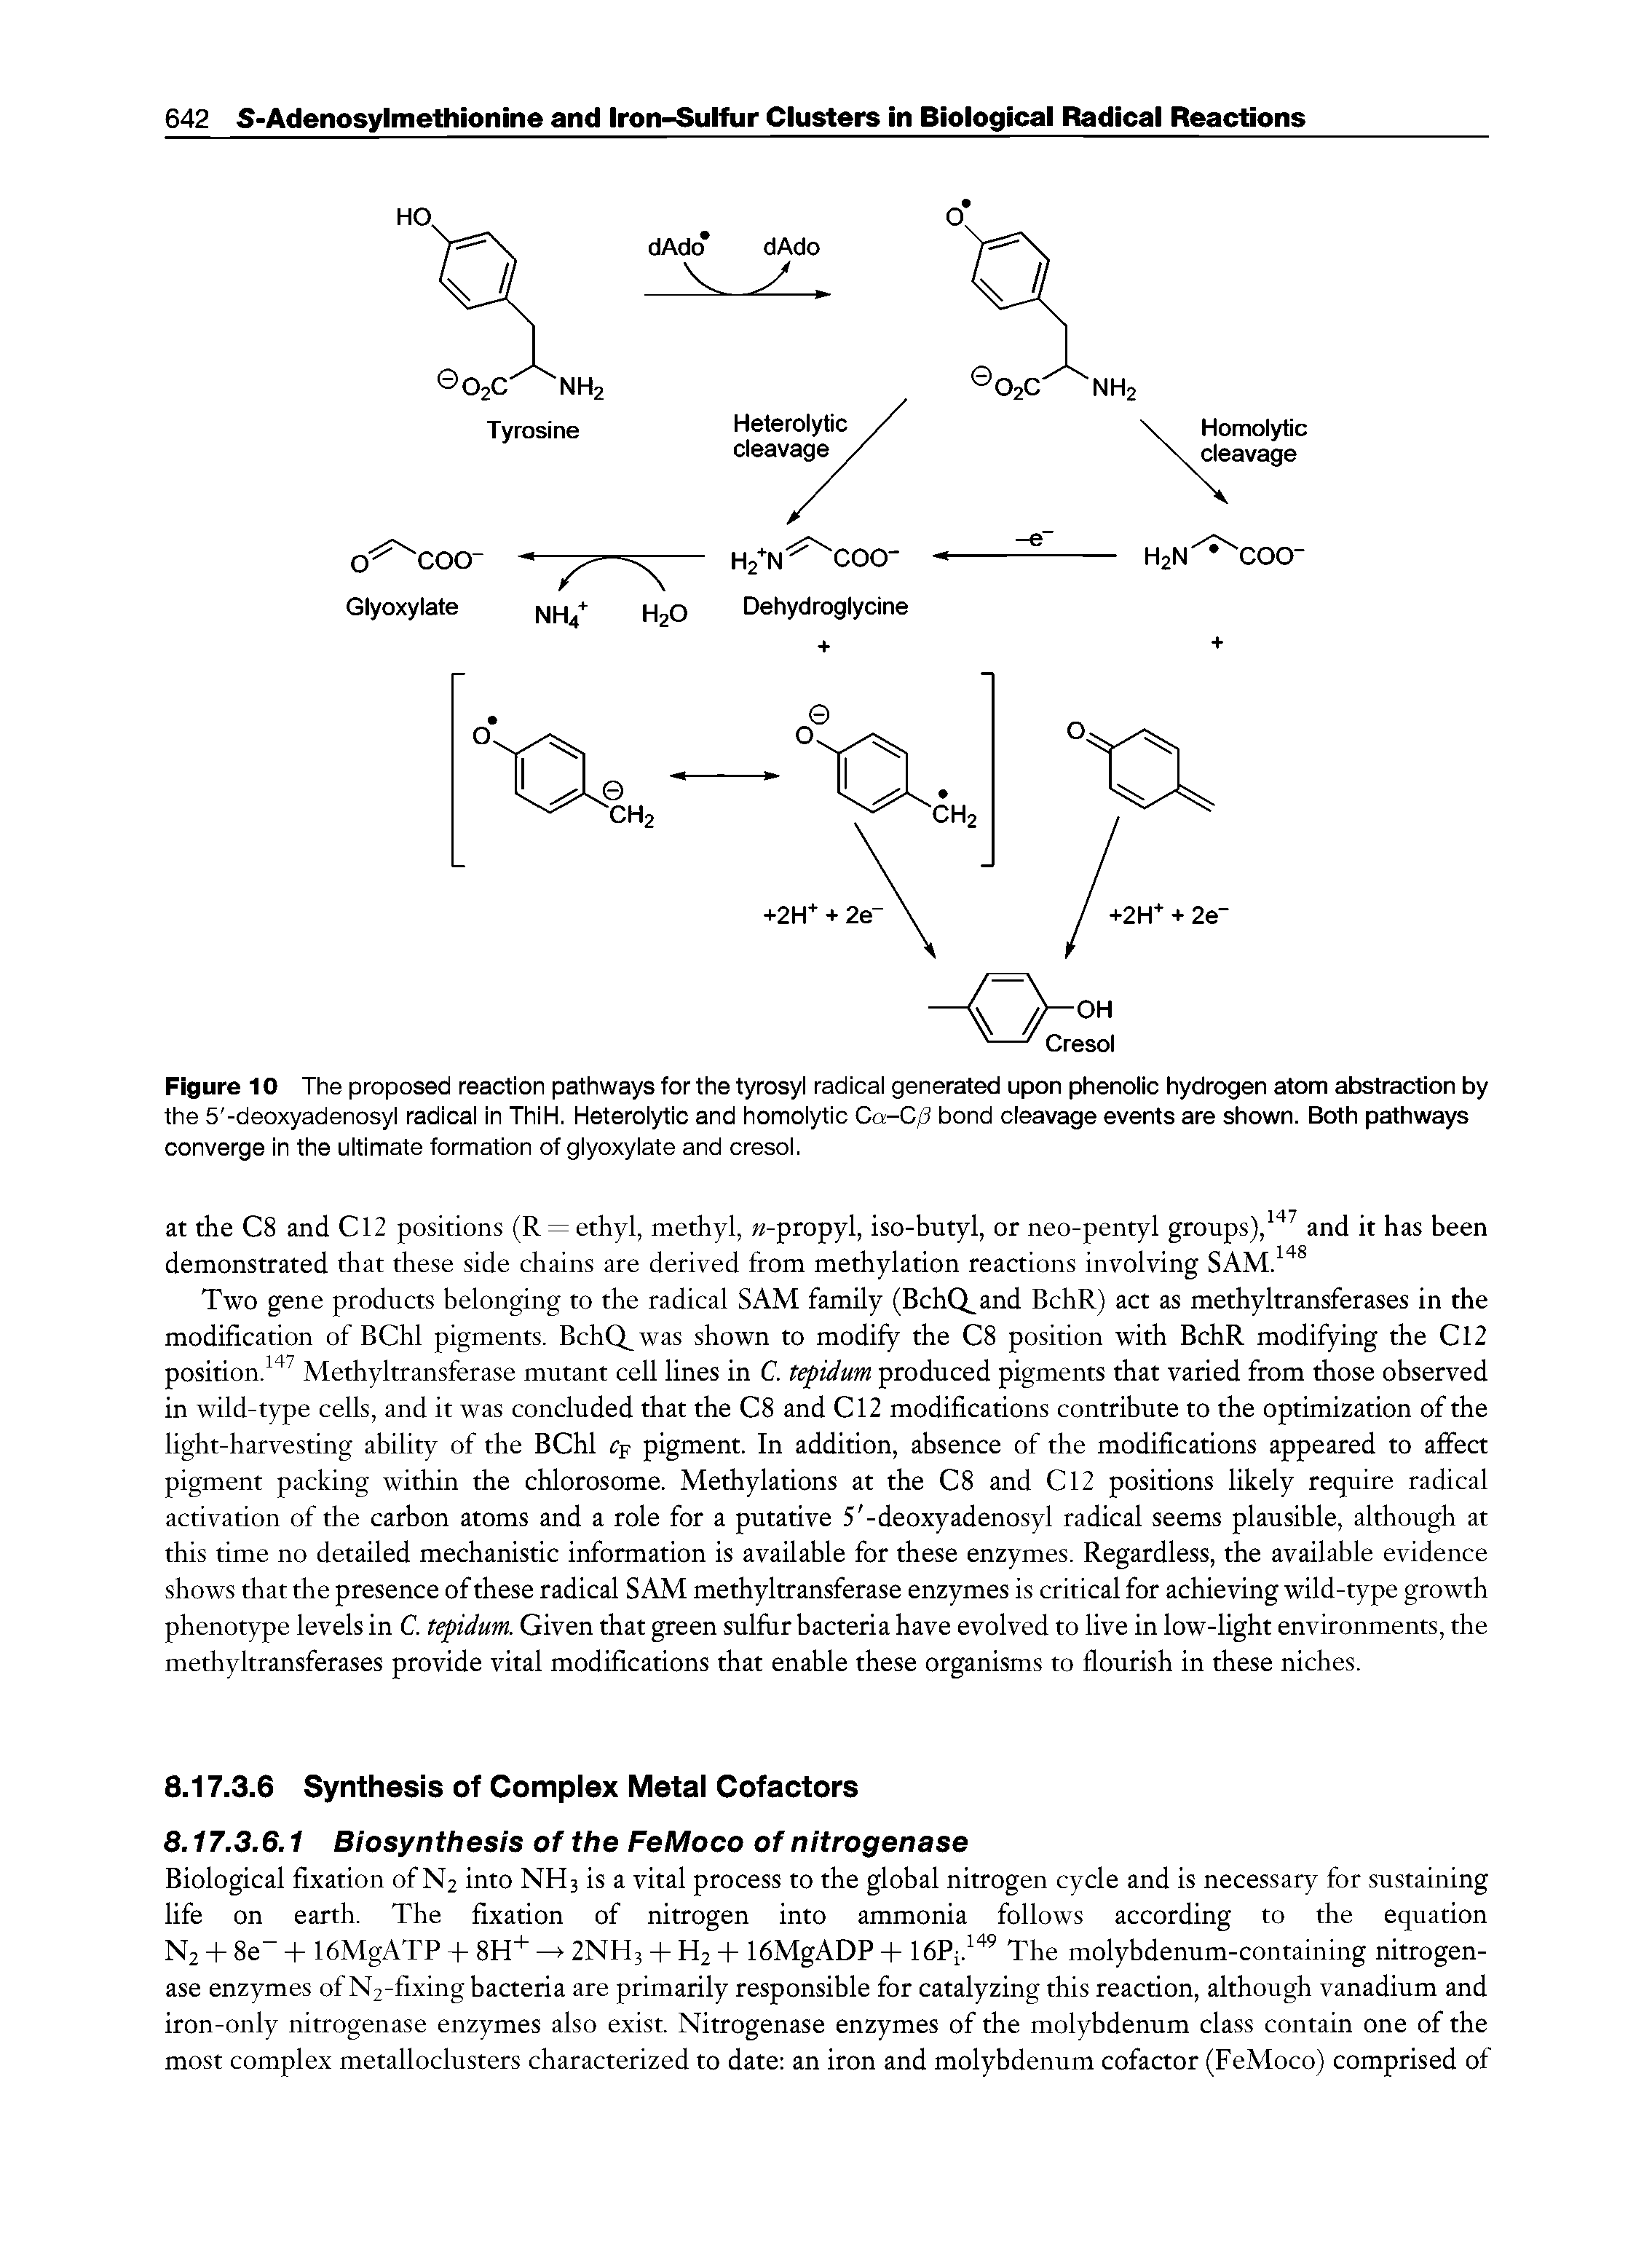 Figure 10 The proposed reaction pathways for the tyrosyl radical generated upon phenolic hydrogen atom abstraction by the 5 -deoxyadenosyl radical in ThiH. Heterolytic and homolytic Ca-C/3 bond cleavage events are shown. Both pathways converge in the ultimate formation of glyoxylate and cresol.